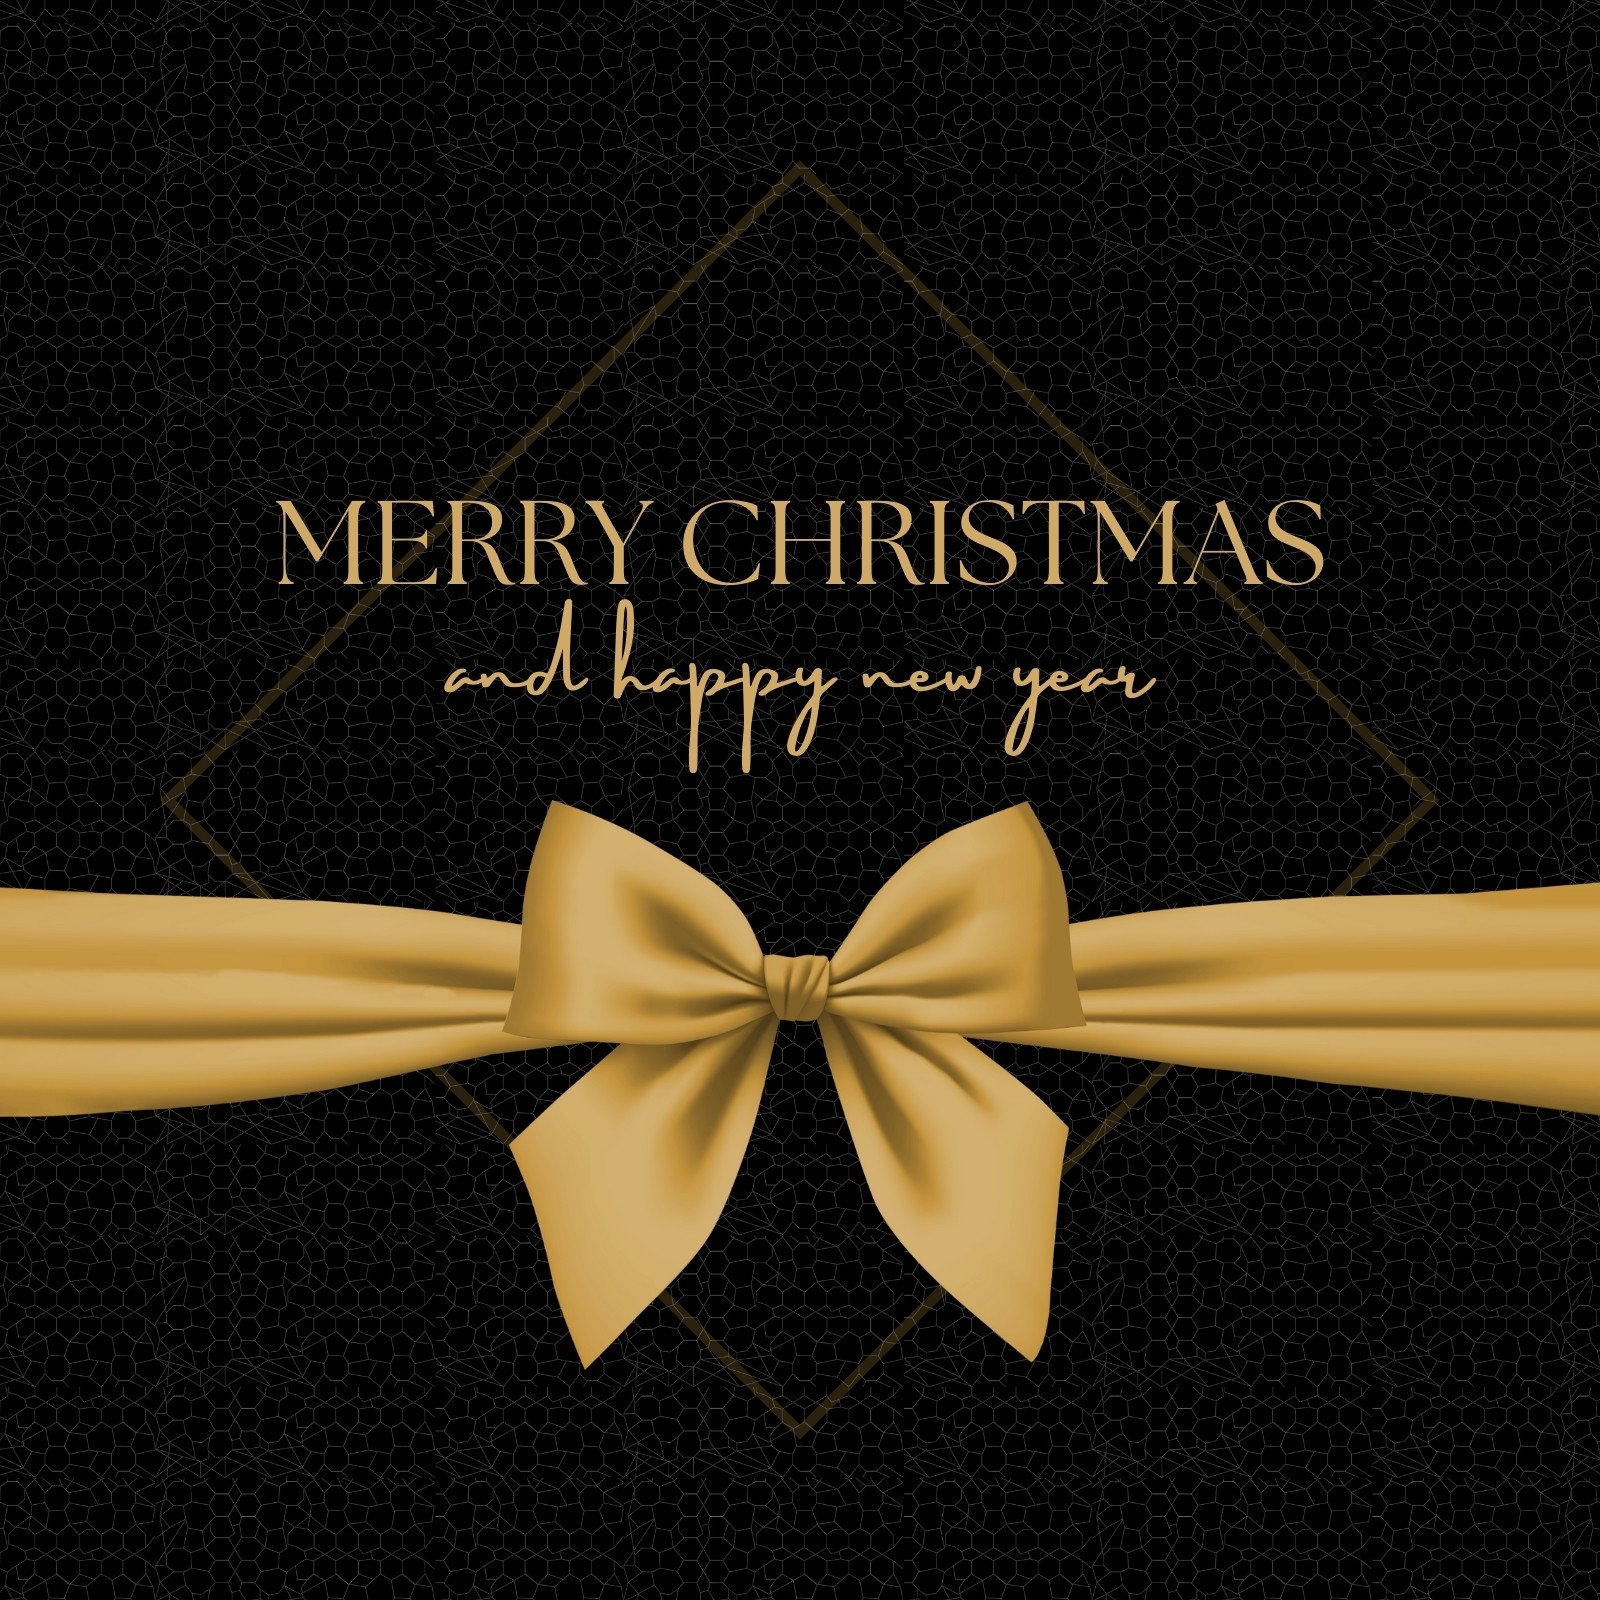 Black Golden Merry Christmas And Happy New Year Square Card